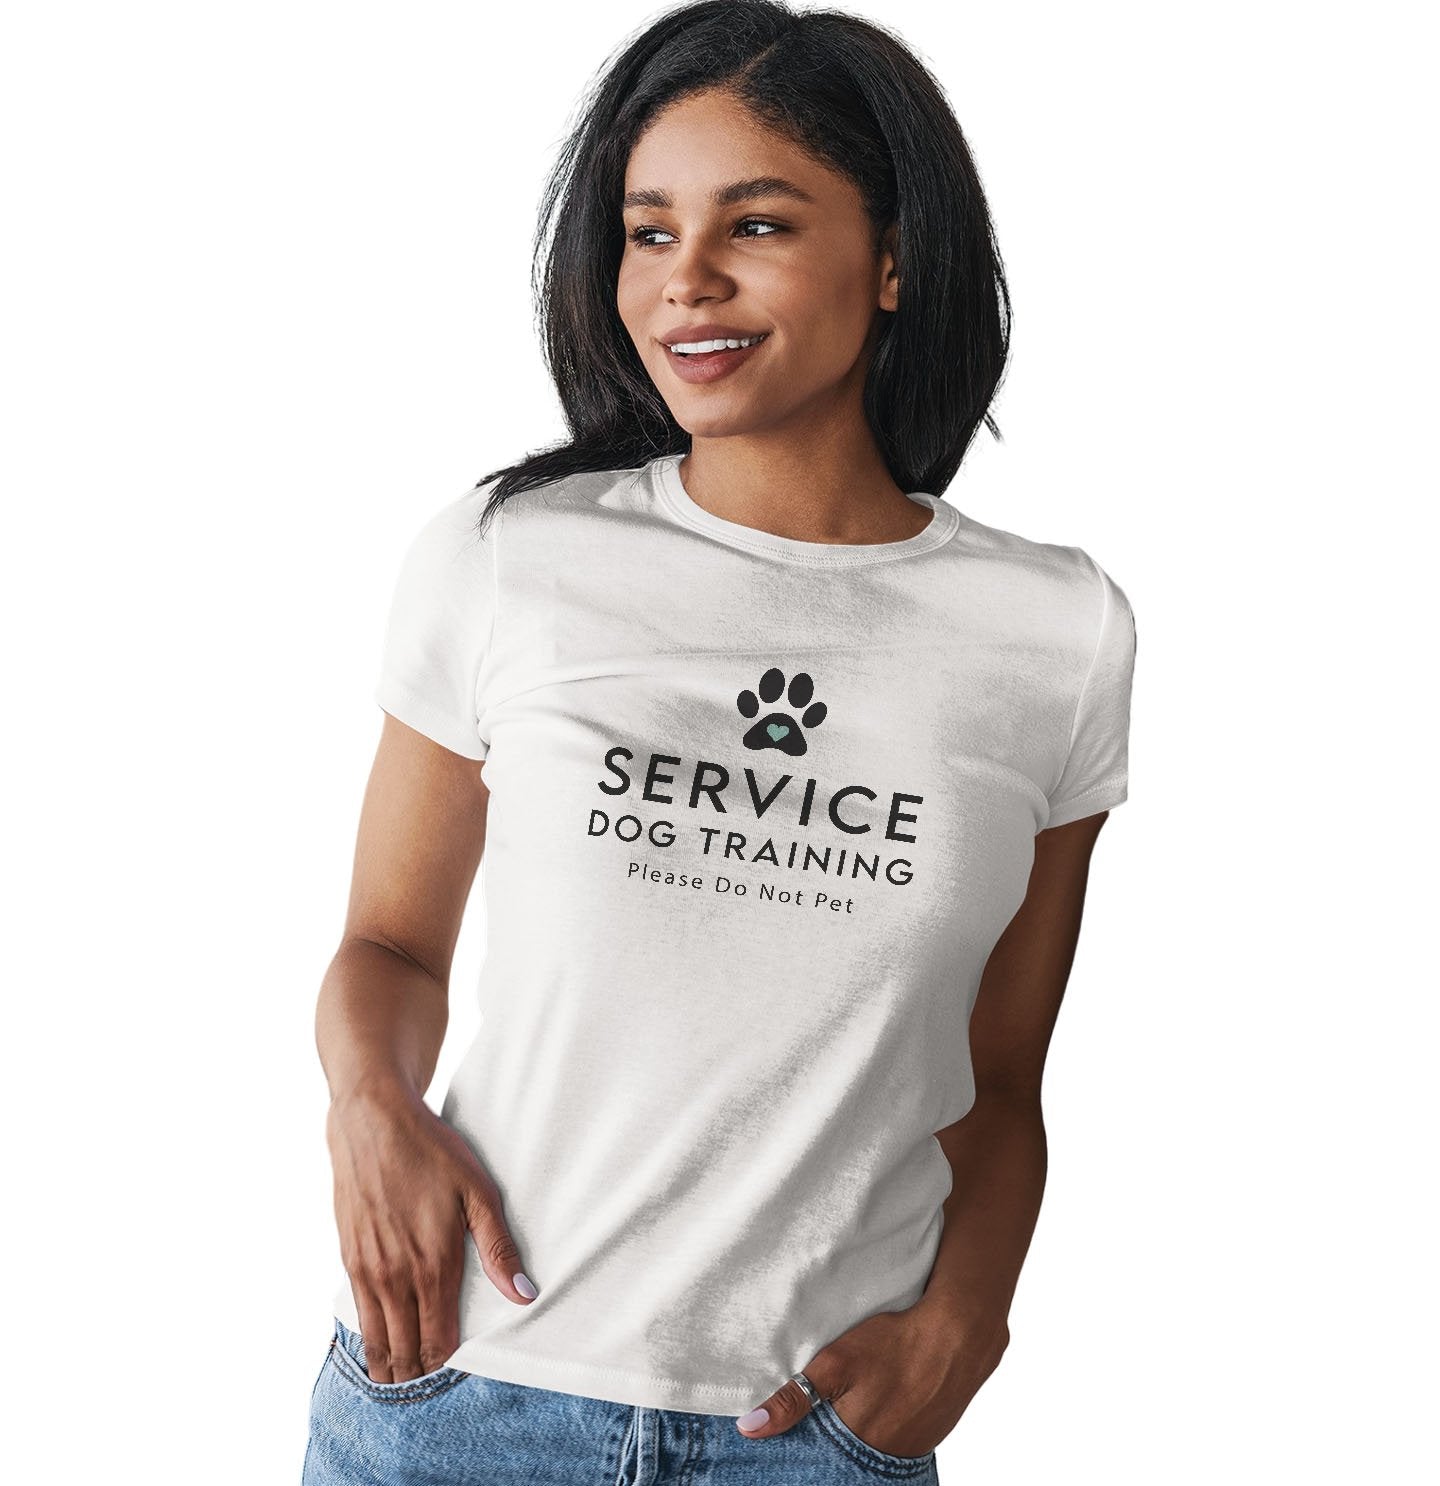 Service Dog Training - Women's Fitted T-Shirt